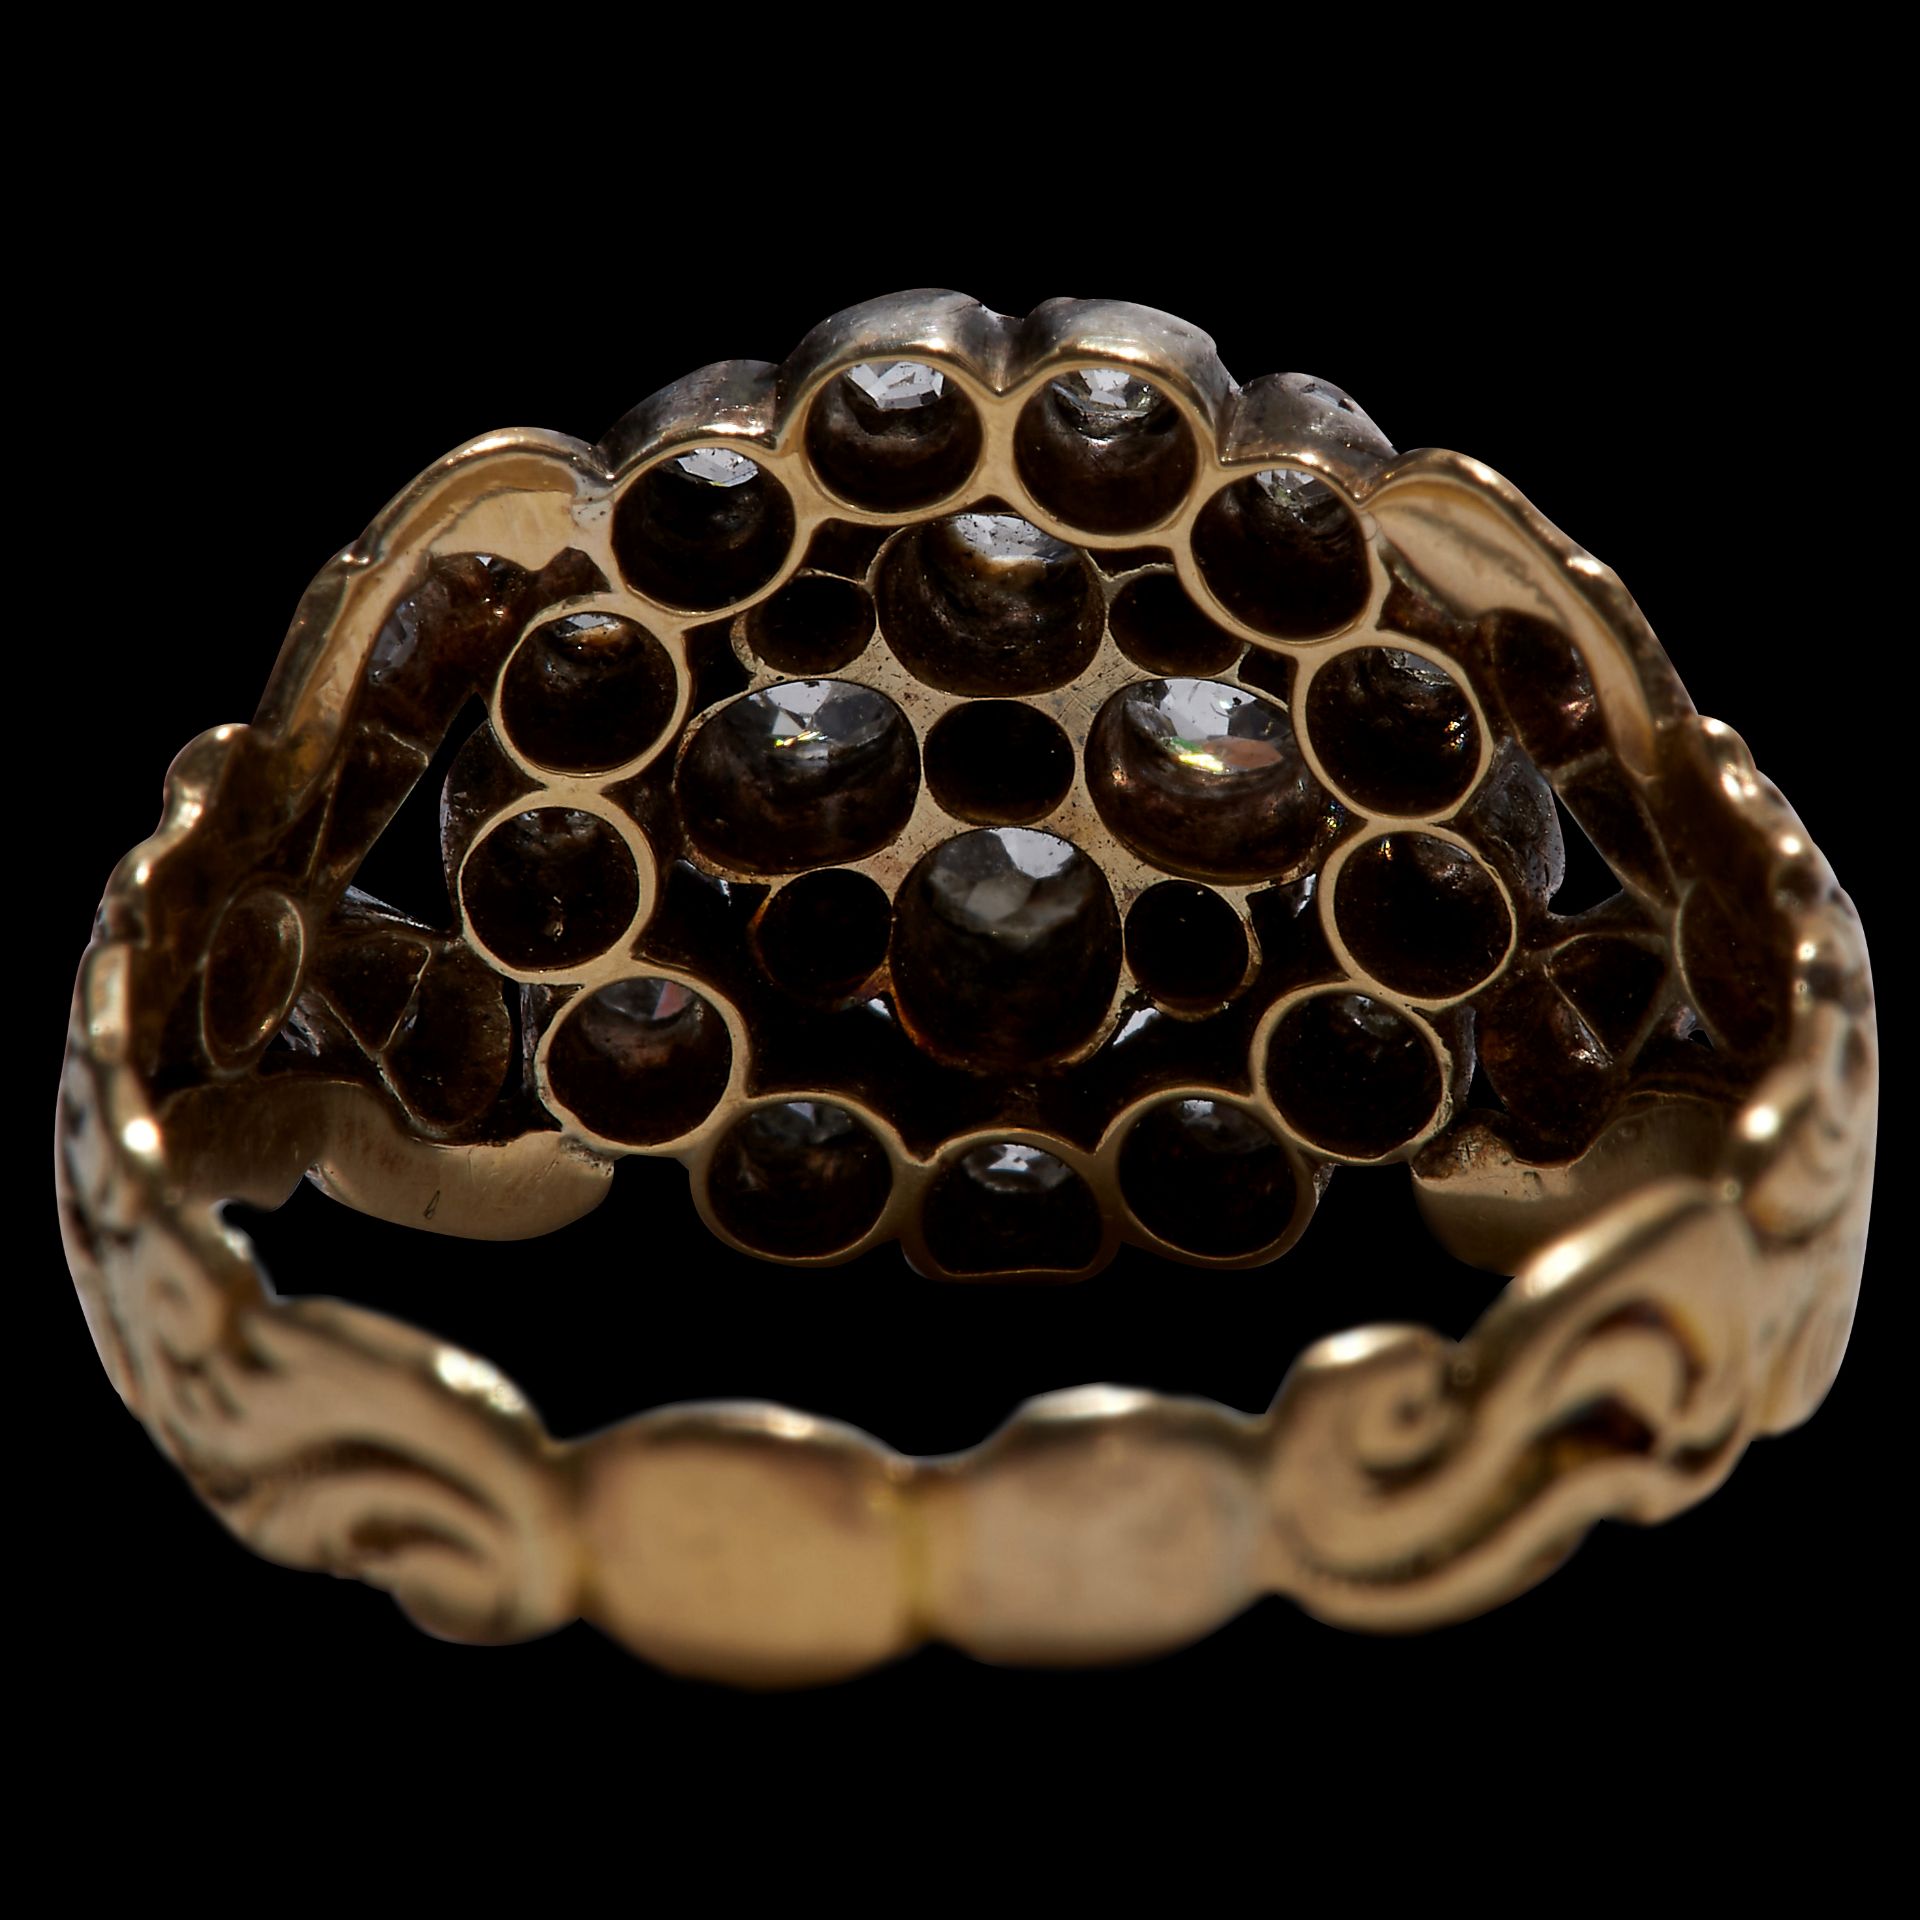 ANTIQUE DIAMOND CLUSTER RING - Image 2 of 2